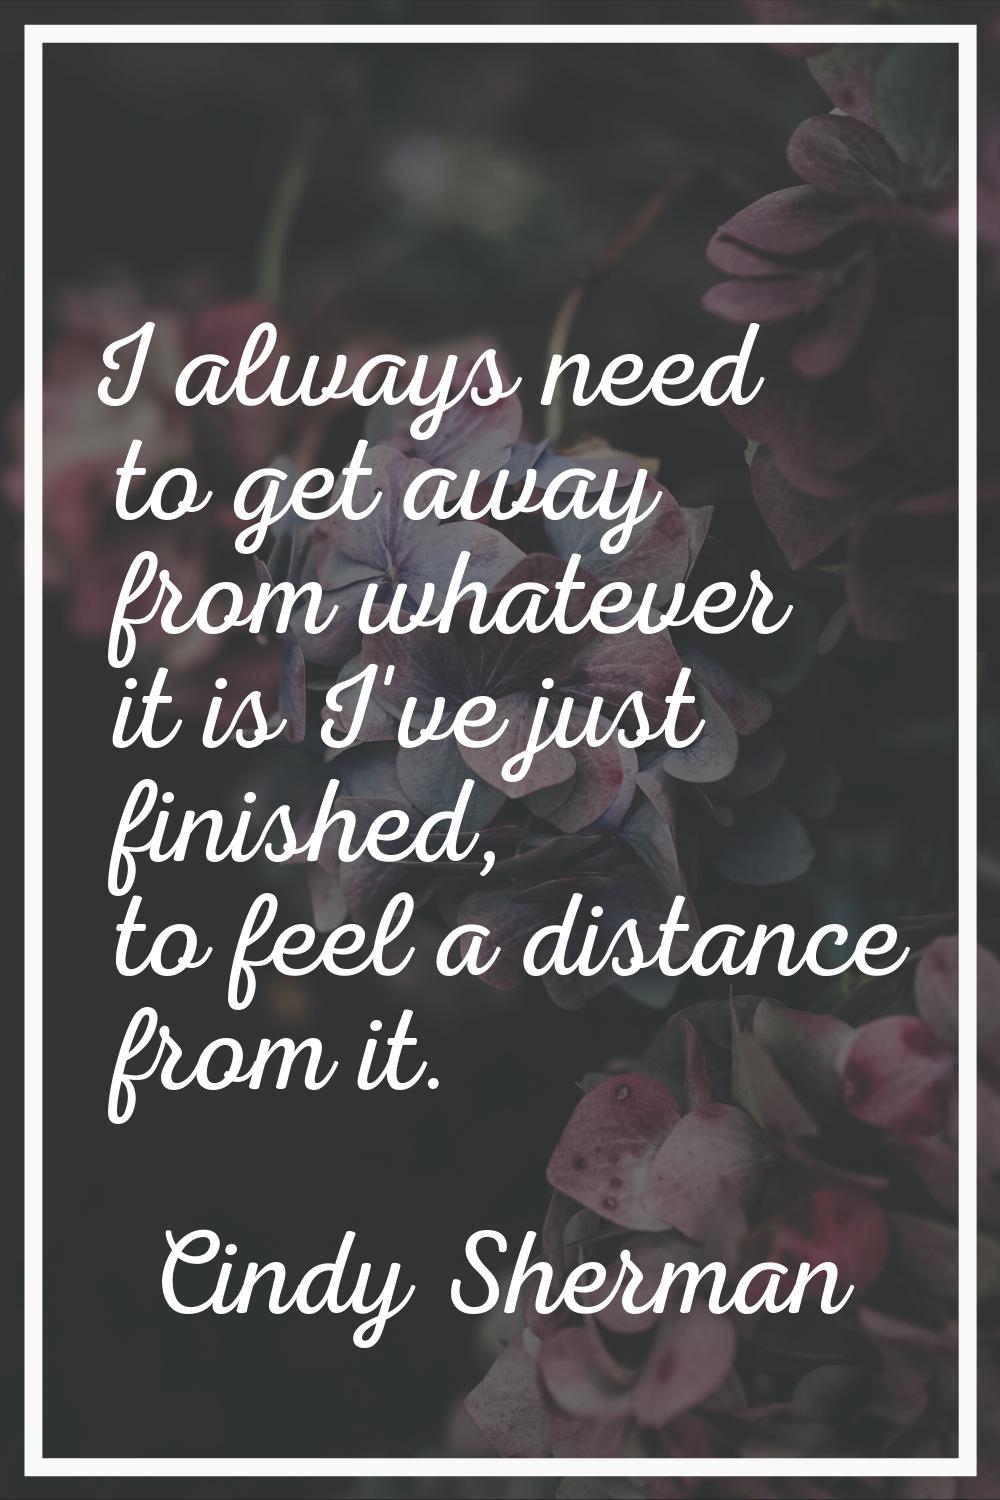 I always need to get away from whatever it is I've just finished, to feel a distance from it.